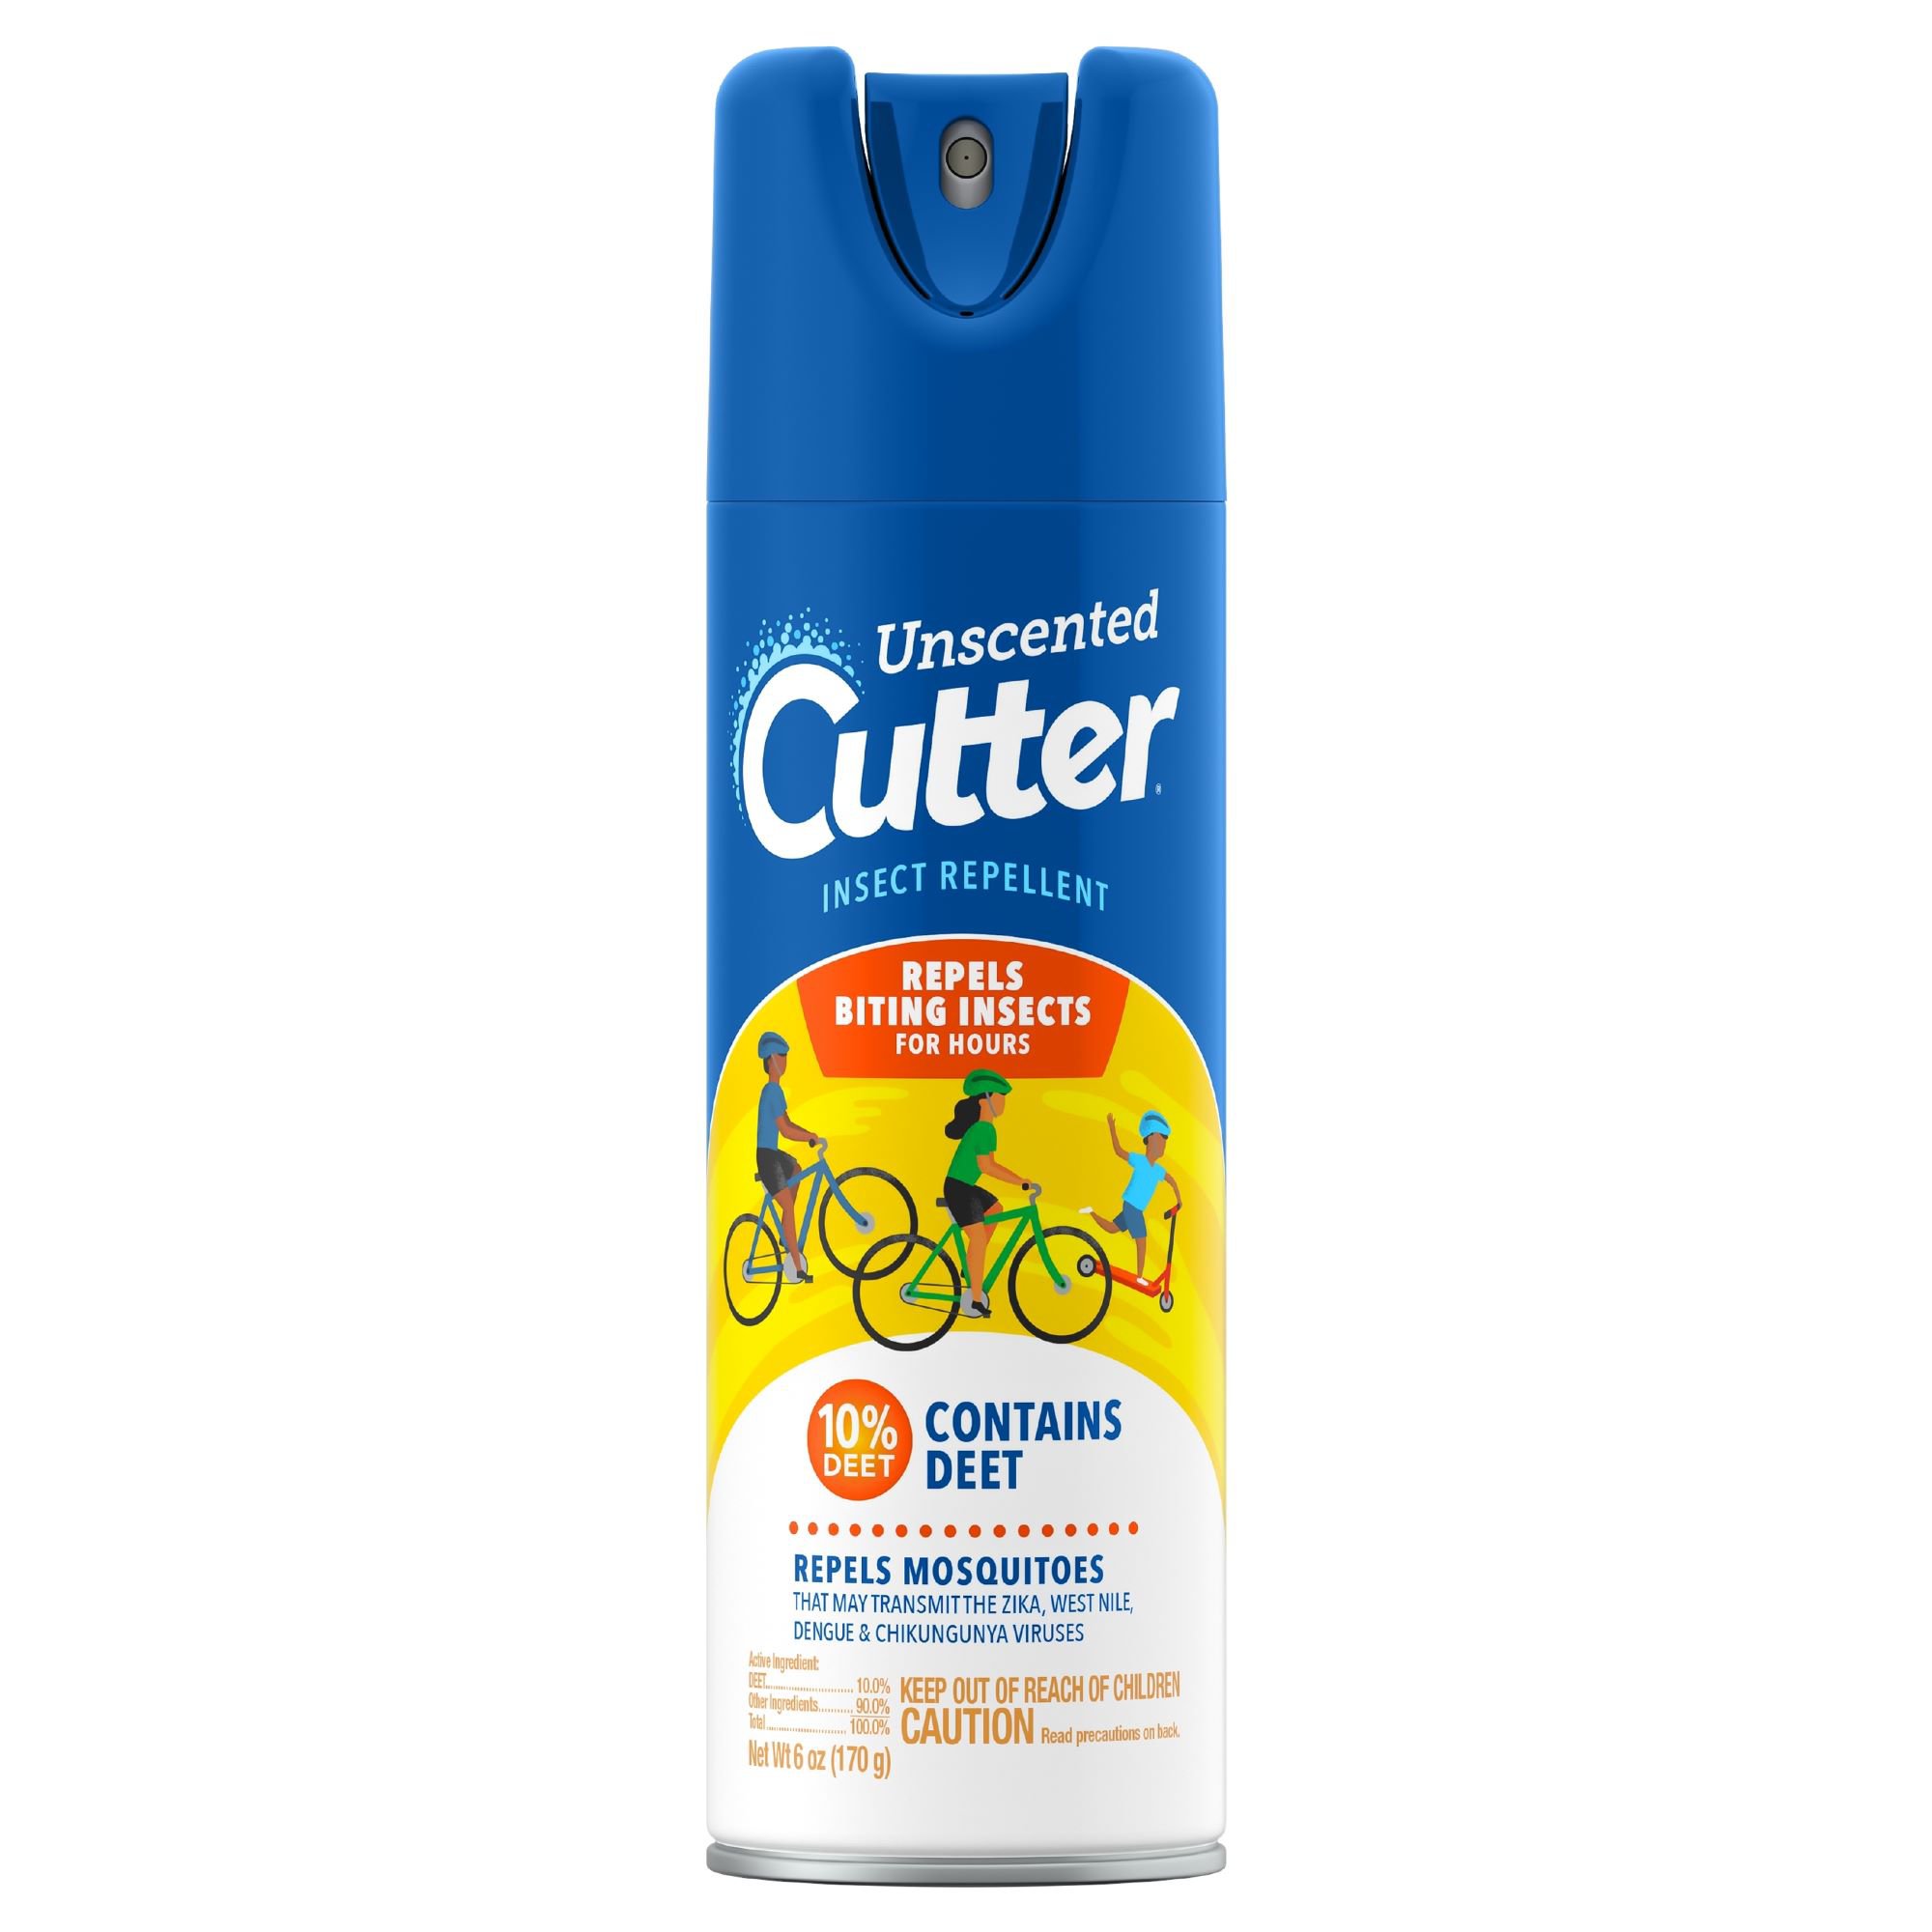 Cutter Unscented Insect Repellent Shop Outdoor Pest Control At HEB